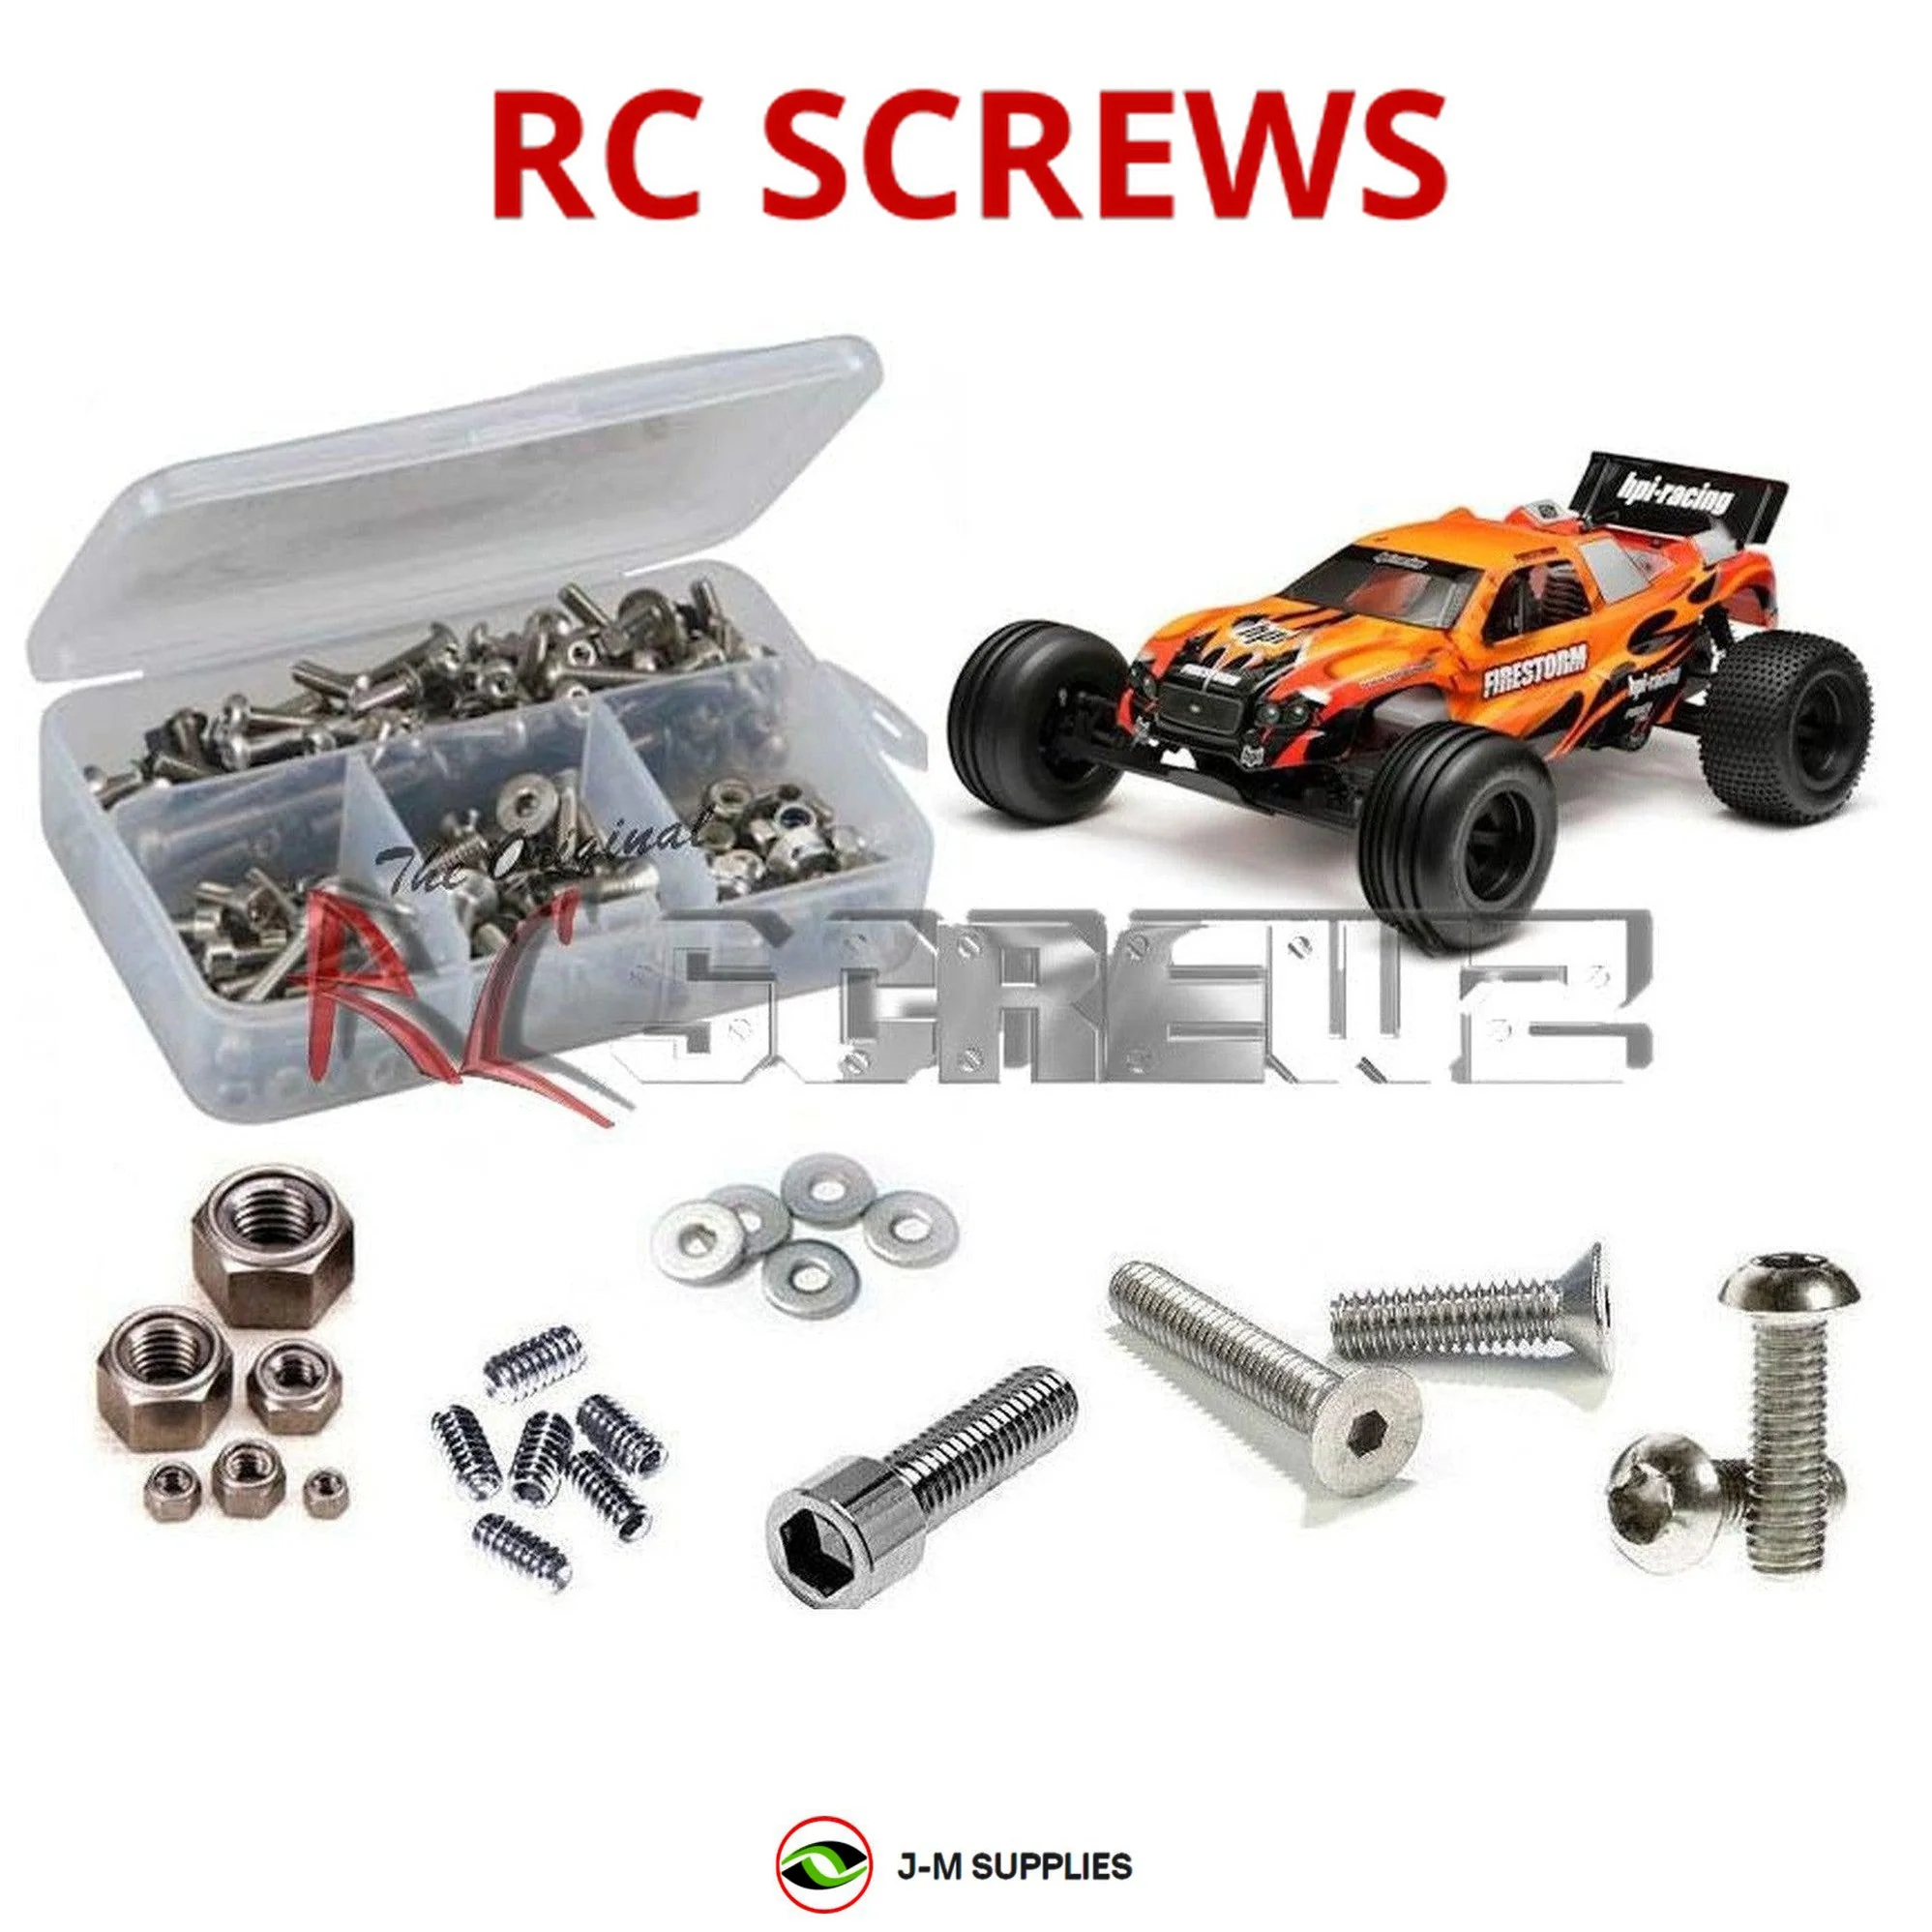 RCScrewZ Stainless Screw Kit+ hpi036 for HPI Racing Nitro Firestorm 10T | PRO - Picture 1 of 12